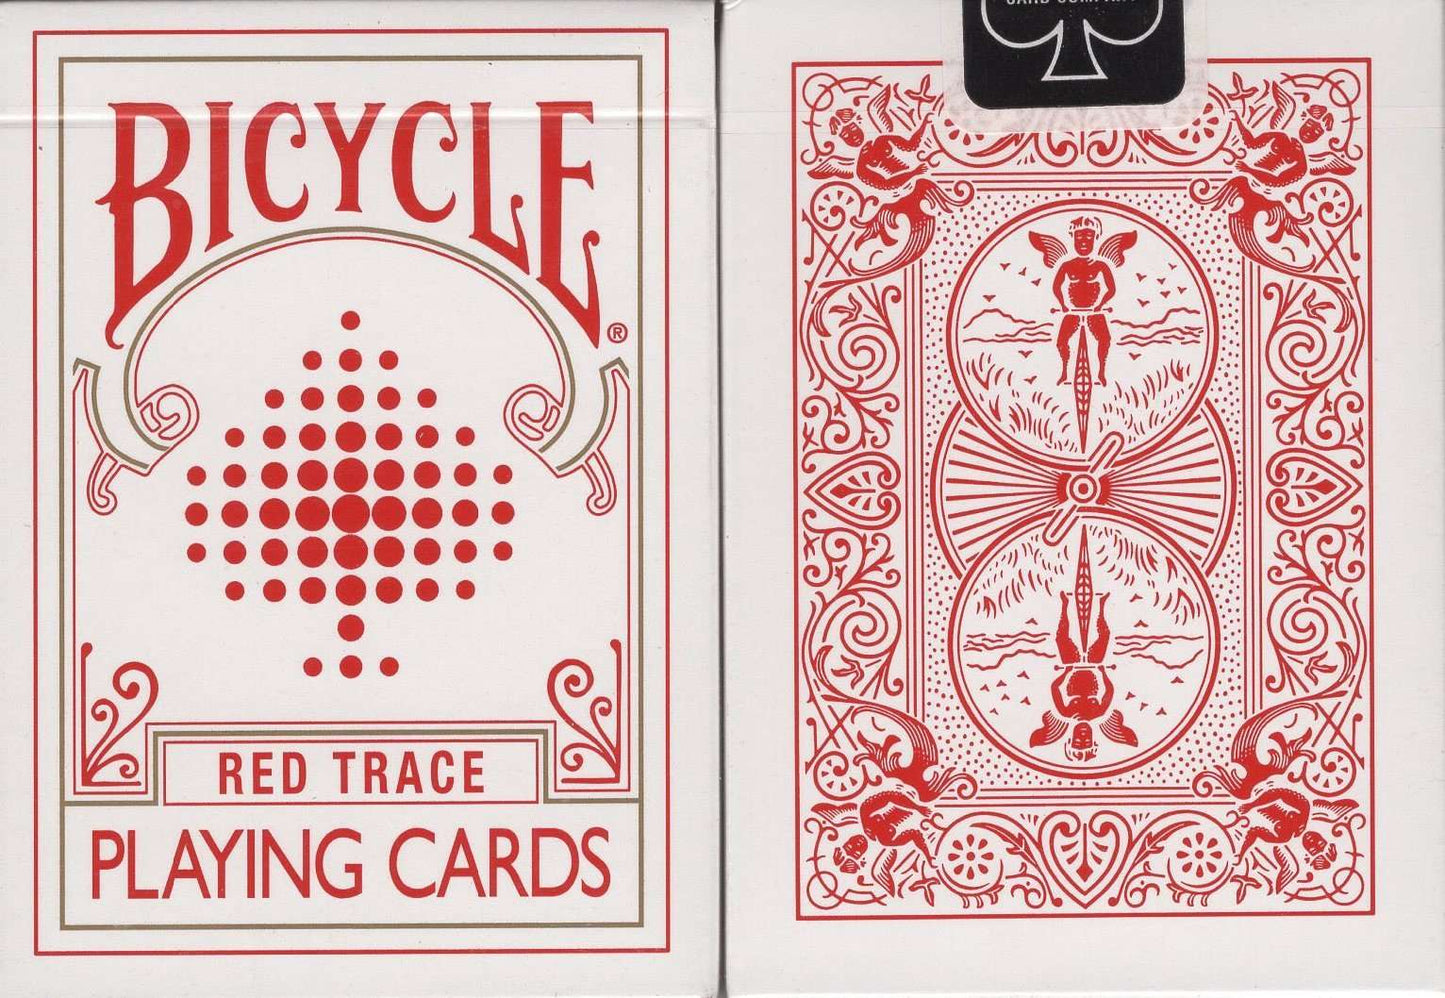 PlayingCardDecks.com-Red Trace Bicycle Playing Cards